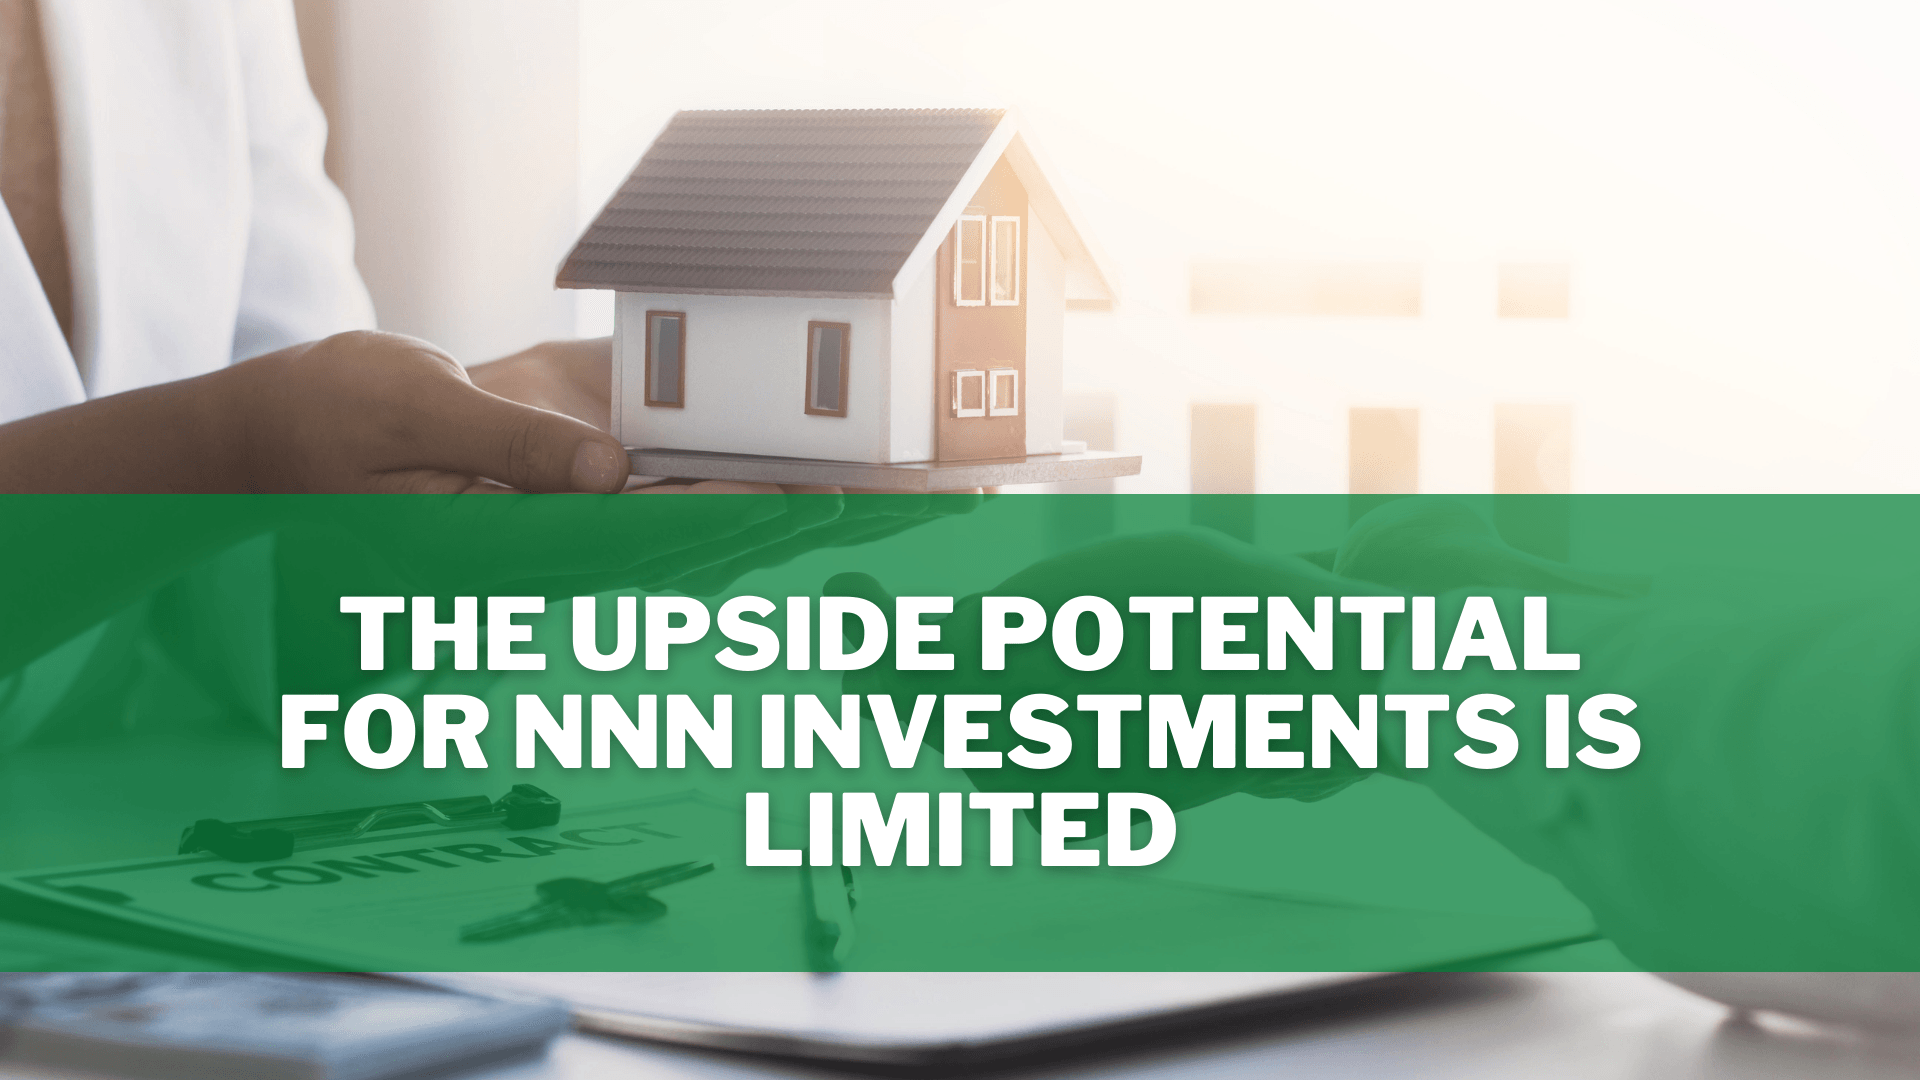 NNN leases typically come at fixed rental rates for long-term tenants